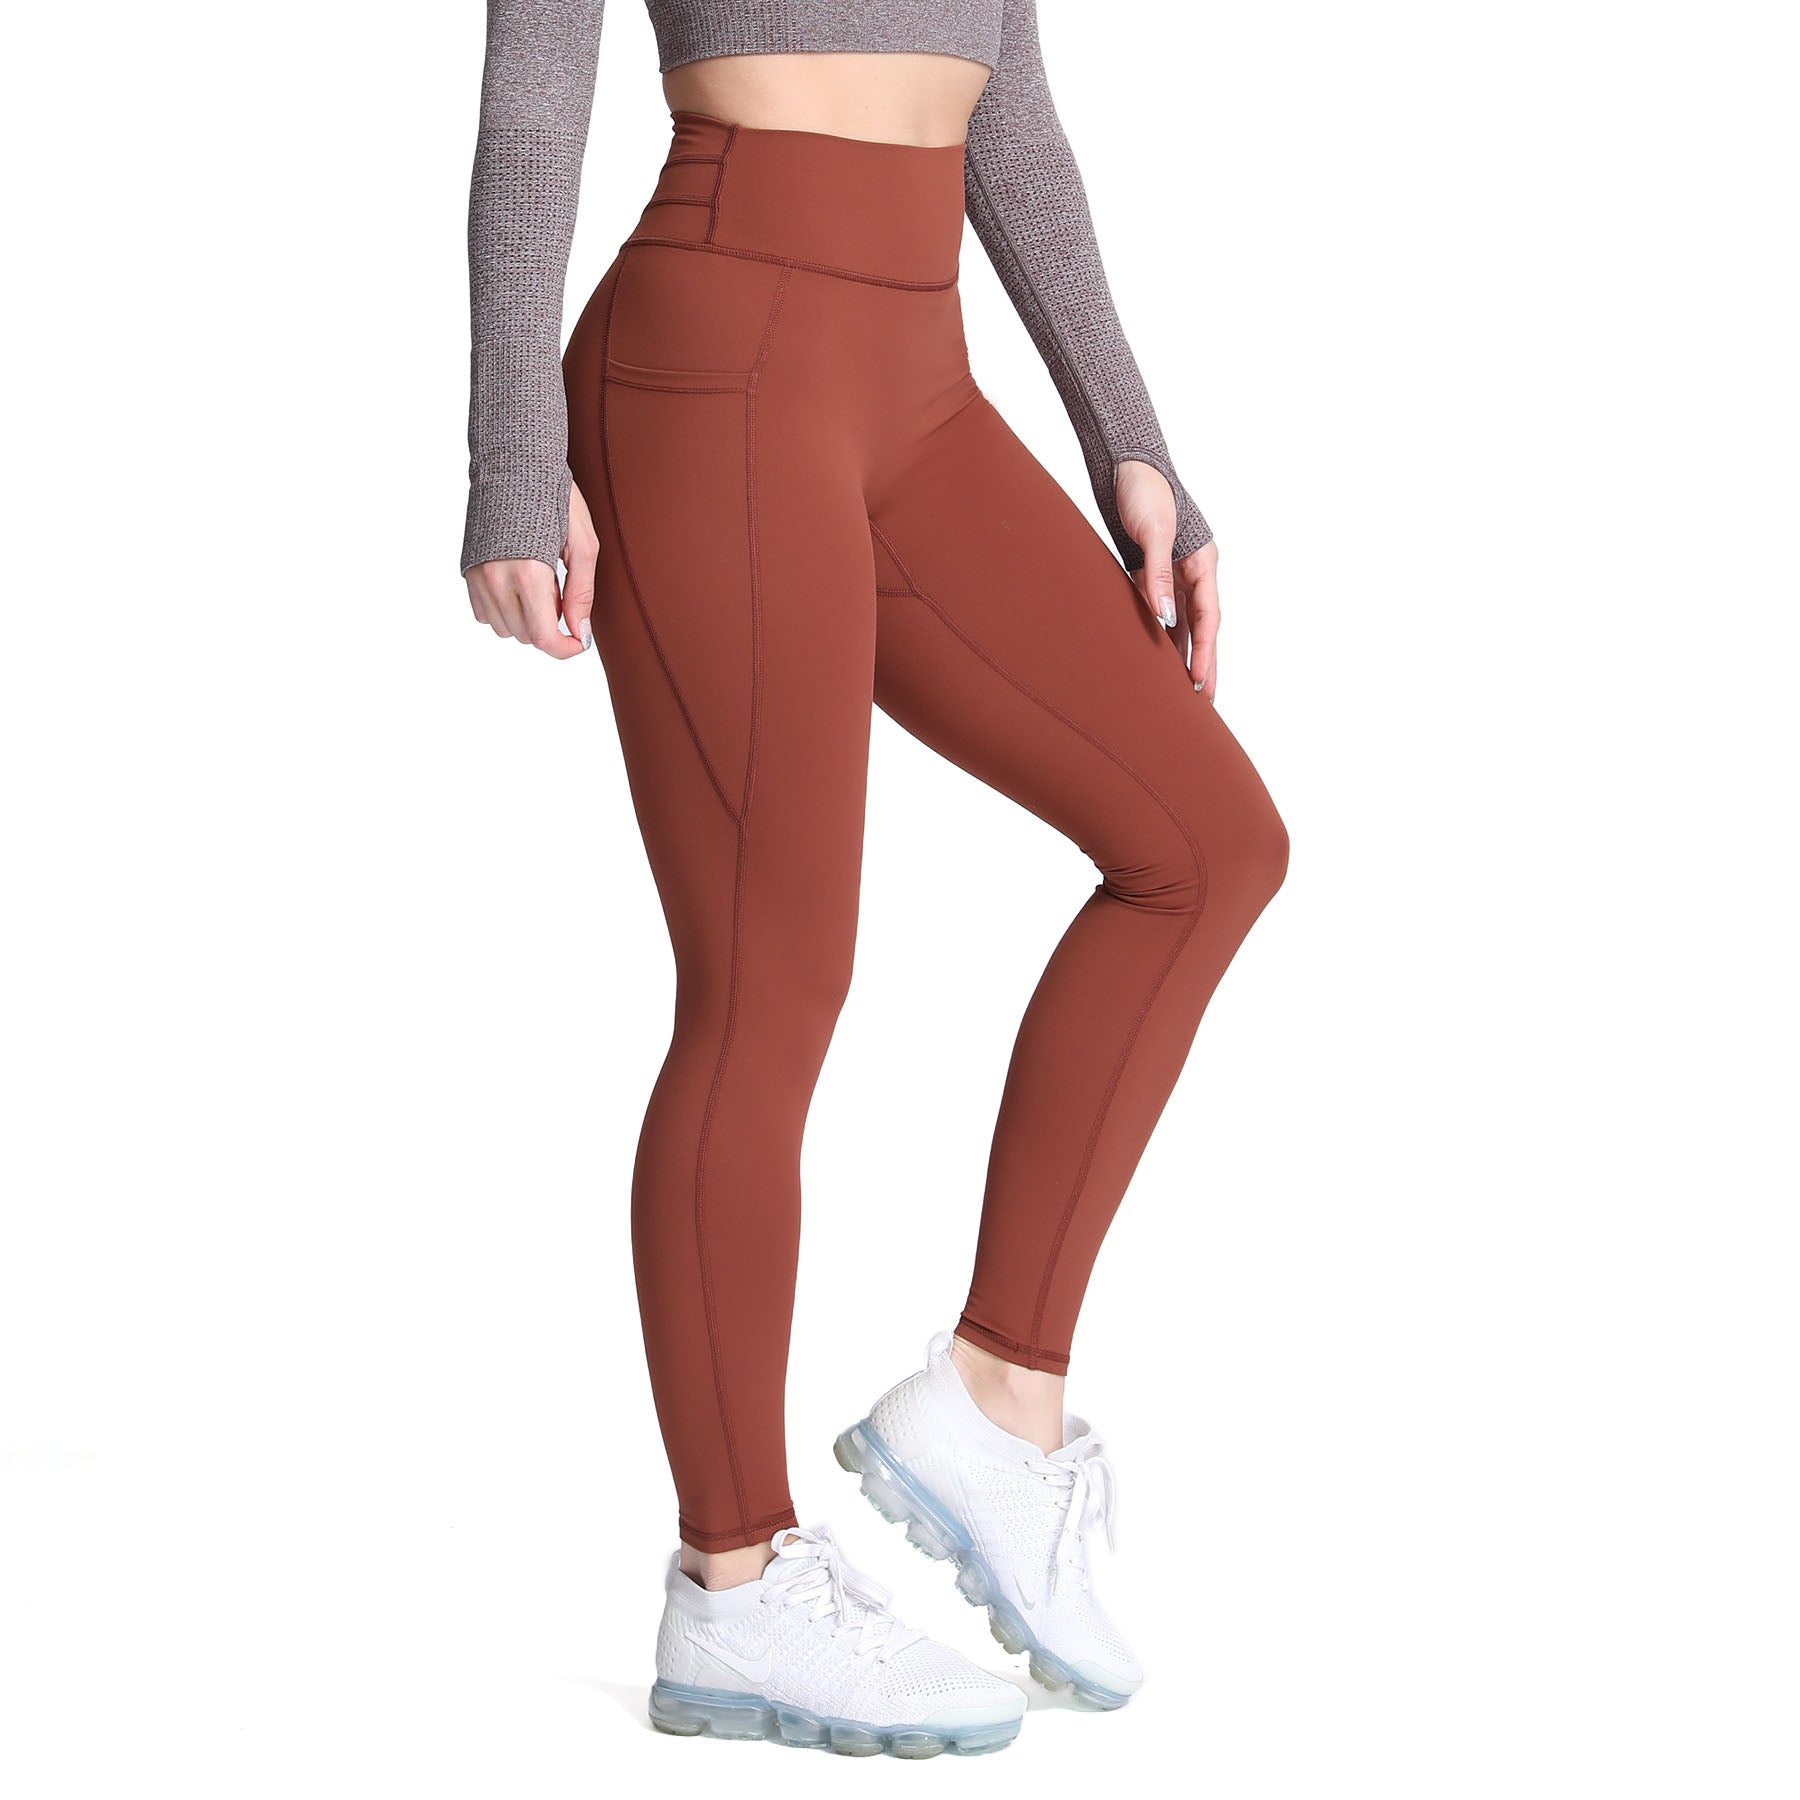  Aoxjox High Waisted Workout Leggings for Women Cross